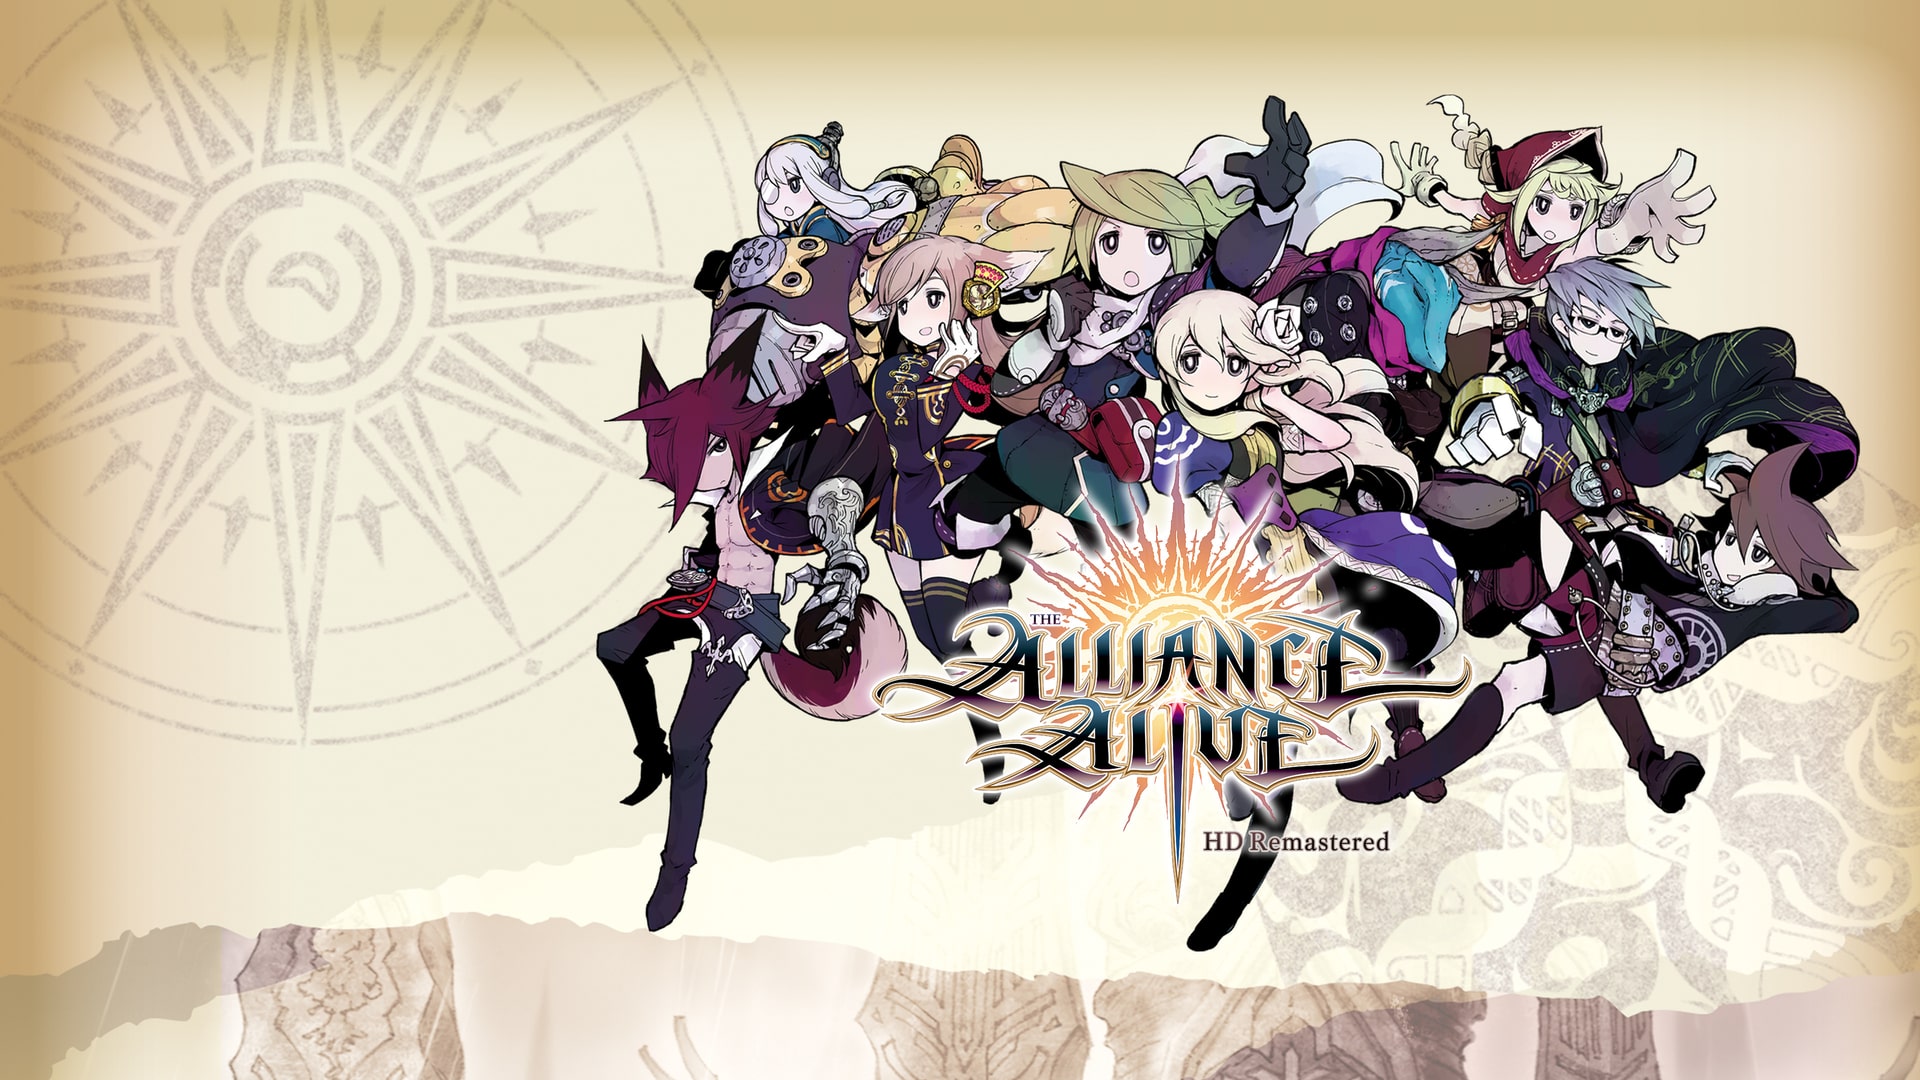 THE ALLIANCE ALIVE HD Remastered (English/Chinese/Korean/Japanese Ver.)